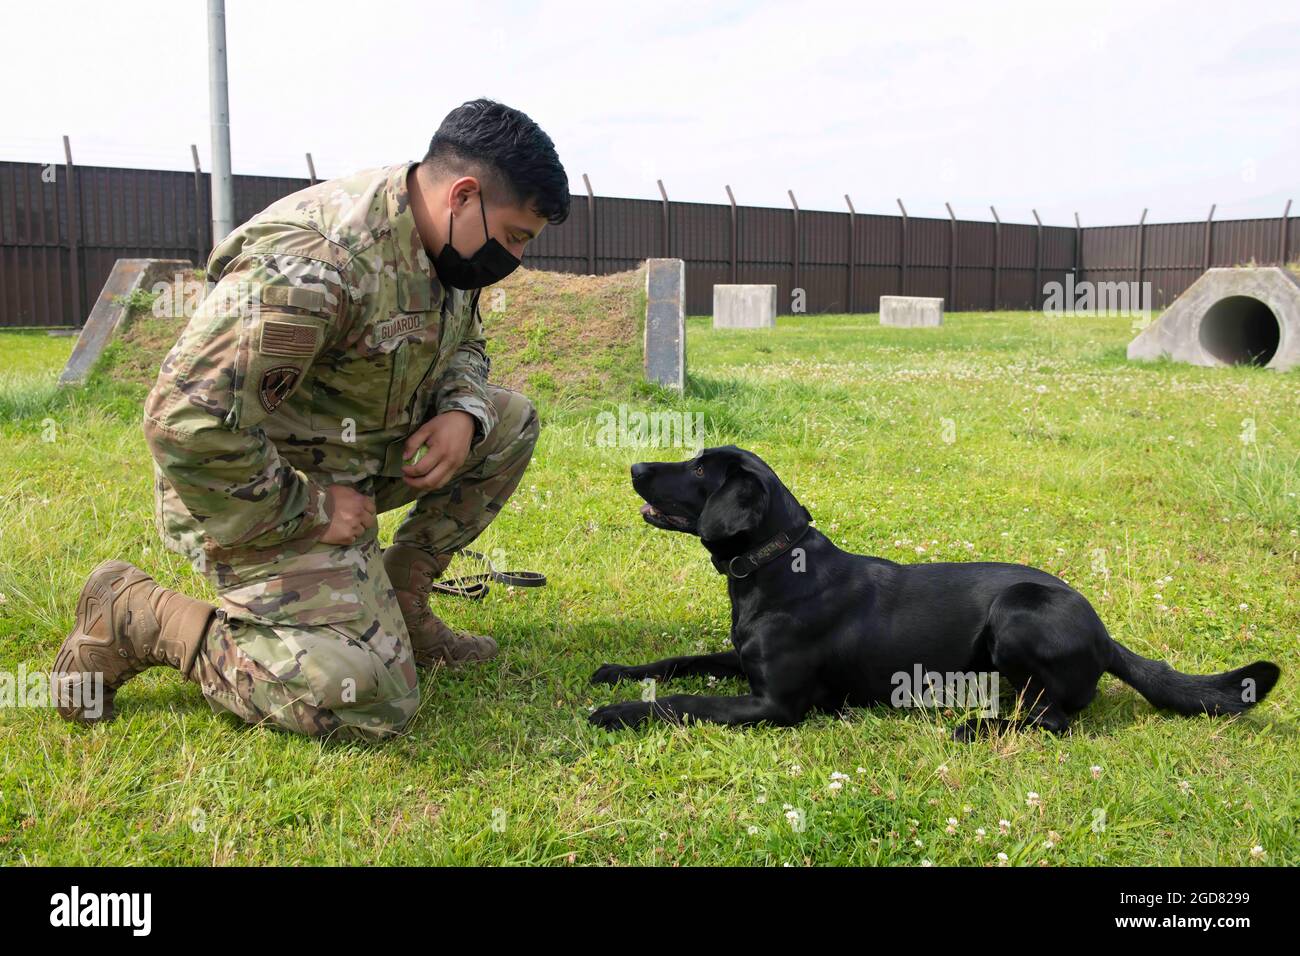 Staff Sgt. Miguel Guajardo, 374th Security Forces Squadron military working dog handler, kneels near Splash, 374th SFS MWD, at Yokota Air Base, Japan, June 11, 2021. With the acquisition of Splash and another MWD, the 374th SFS went from a year-long shortage in manpower for MWDs to an overage. (U.S. Air Force photo by Staff Sgt. Joshua Edwards) Stock Photo